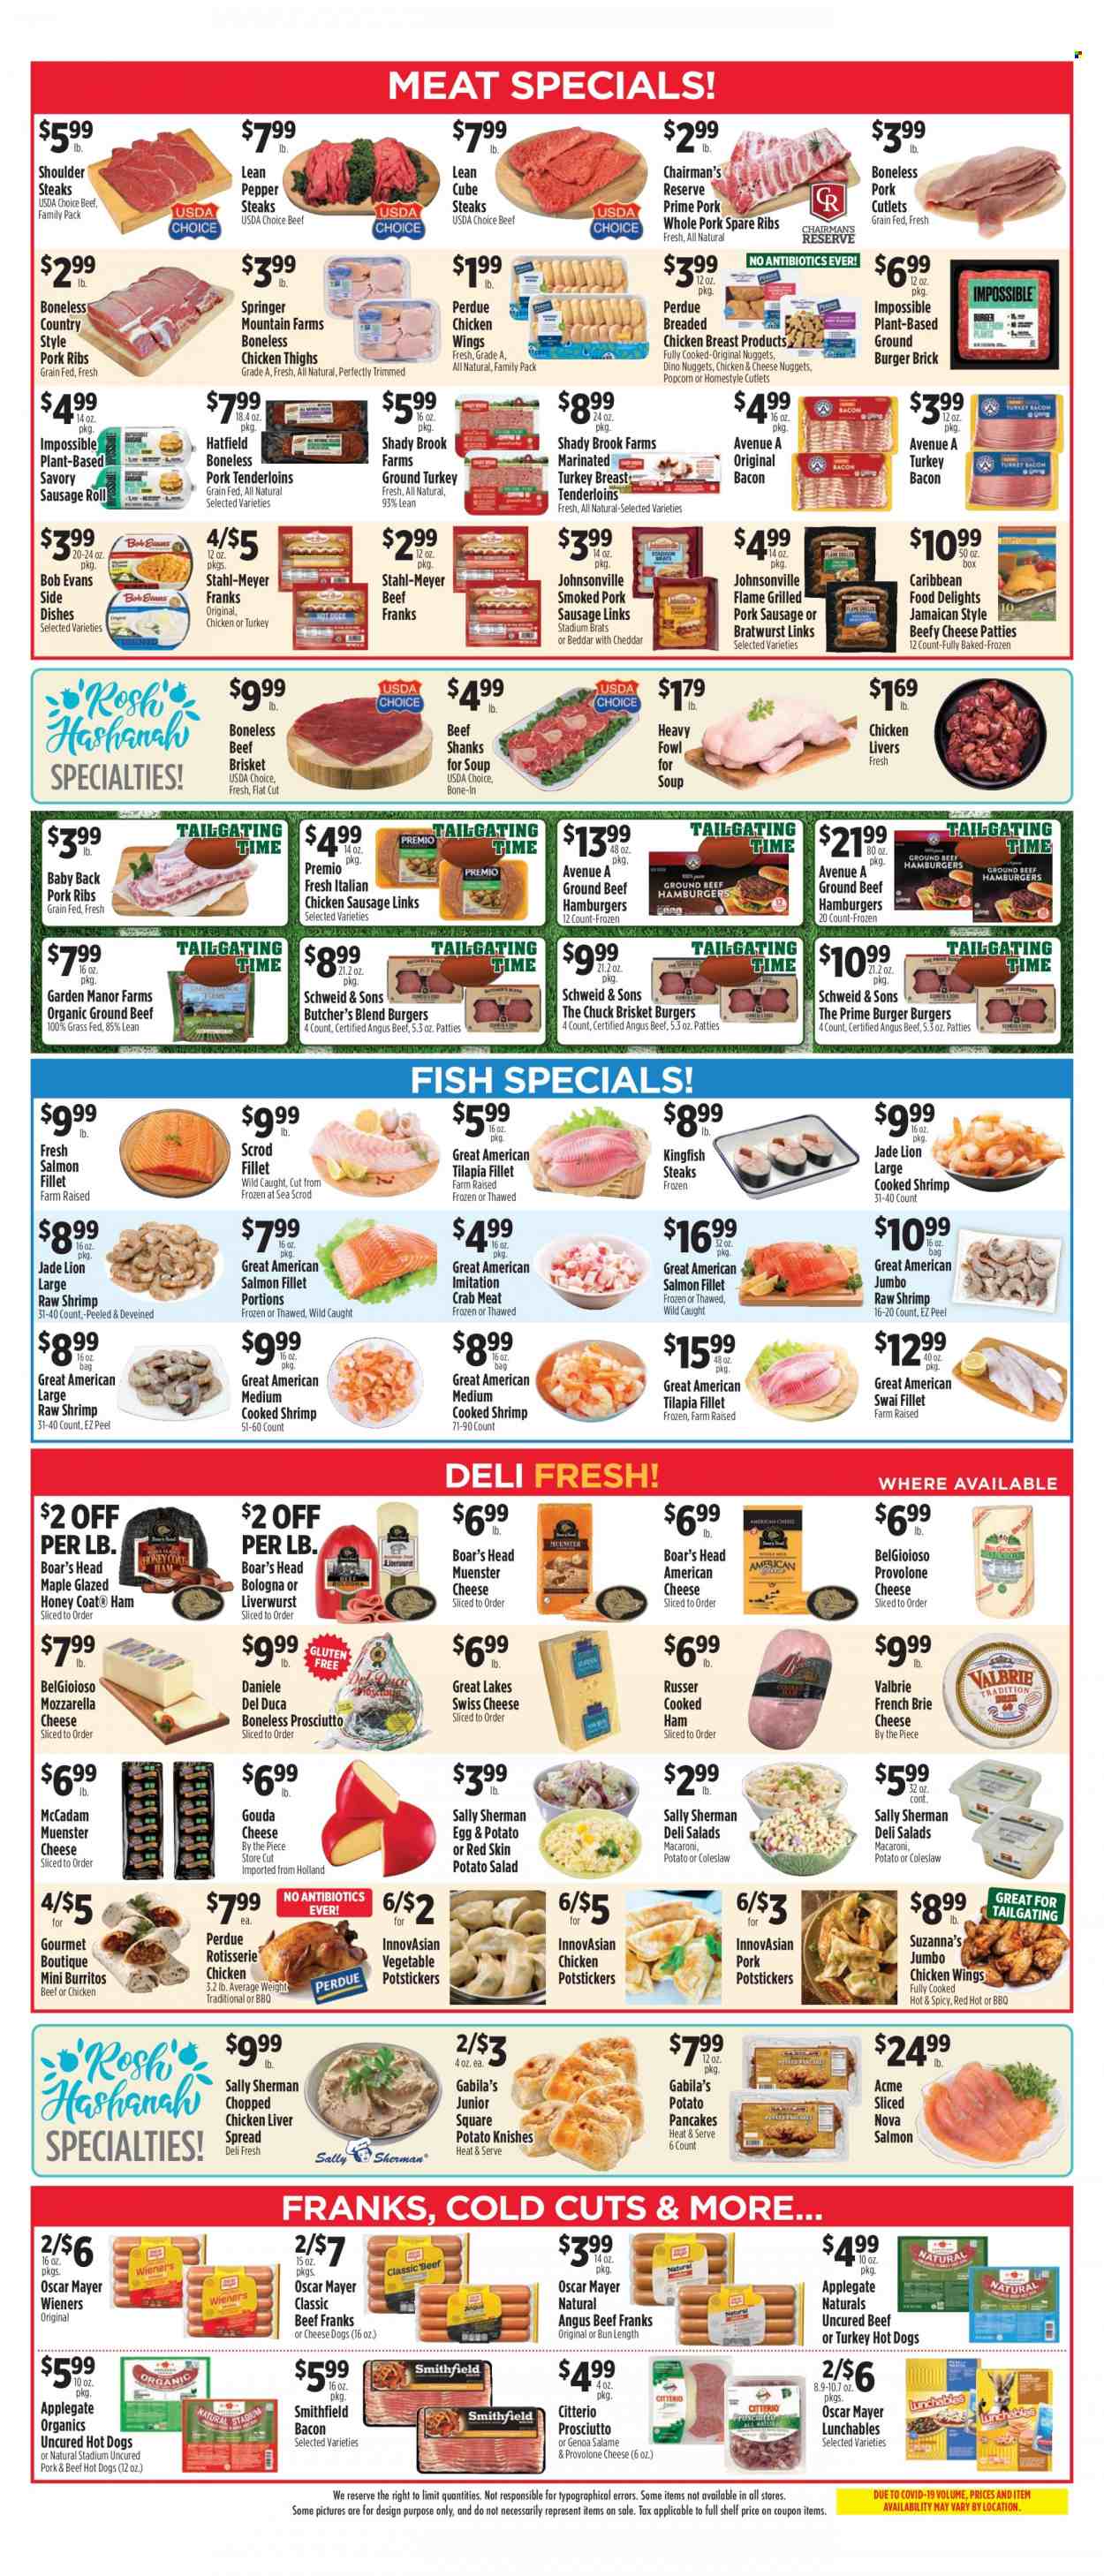 thumbnail - Pioneer Supermarkets Flyer - 09/25/2022 - 10/01/2022 - Sales products - sausage rolls, salad, crab meat, salmon, salmon fillet, tilapia, crab, fish, king fish, shrimps, swai fillet, coleslaw, hot dog, chicken roast, macaroni, soup, nuggets, hamburger, fried chicken, pancakes, burrito, cheese nuggets, potato pancakes, Perdue®, Lunchables, Bob Evans, bacon, cooked ham, turkey bacon, ham, prosciutto, bologna sausage, Johnsonville, Oscar Mayer, bratwurst, sausage, pork sausage, chicken sausage, potato salad, american cheese, gouda, mozzarella, swiss cheese, brie, Münster cheese, Provolone, eggs, chicken wings, popcorn, pepper, ground turkey, turkey breast, chicken thighs, turkey tenderloin, beef meat, ground beef, steak, beef brisket, pork meat, pork ribs, pork tenderloin, pork spare ribs, pork back ribs. Page 5.